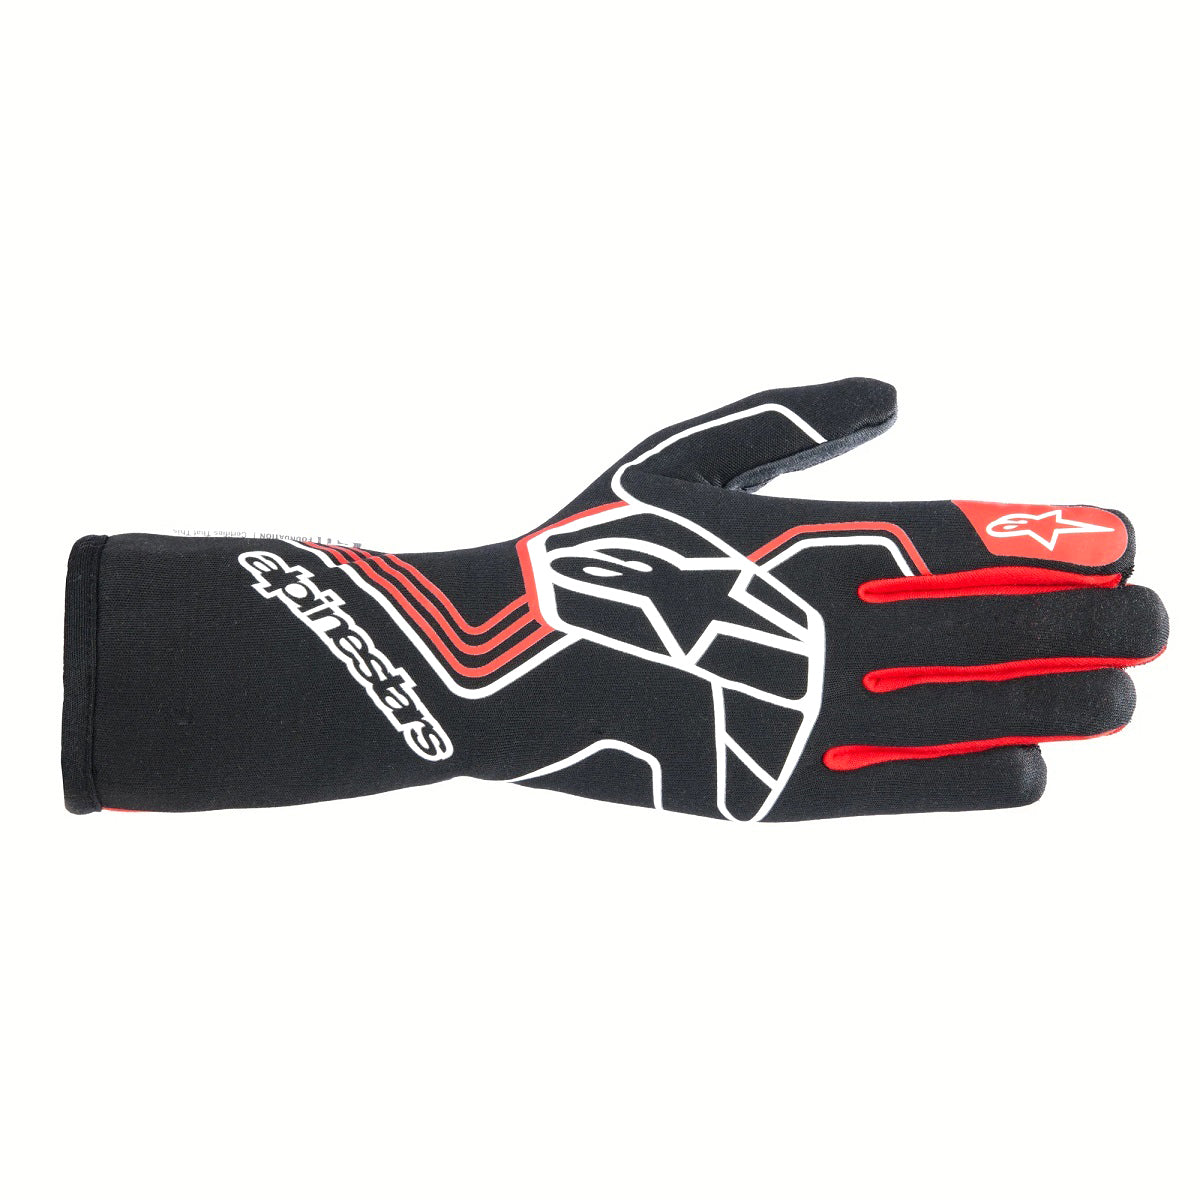 Alpinestars Glove Tech-1 Race V4 Black / Red XX-Large Safety Clothing Driving Gloves main image